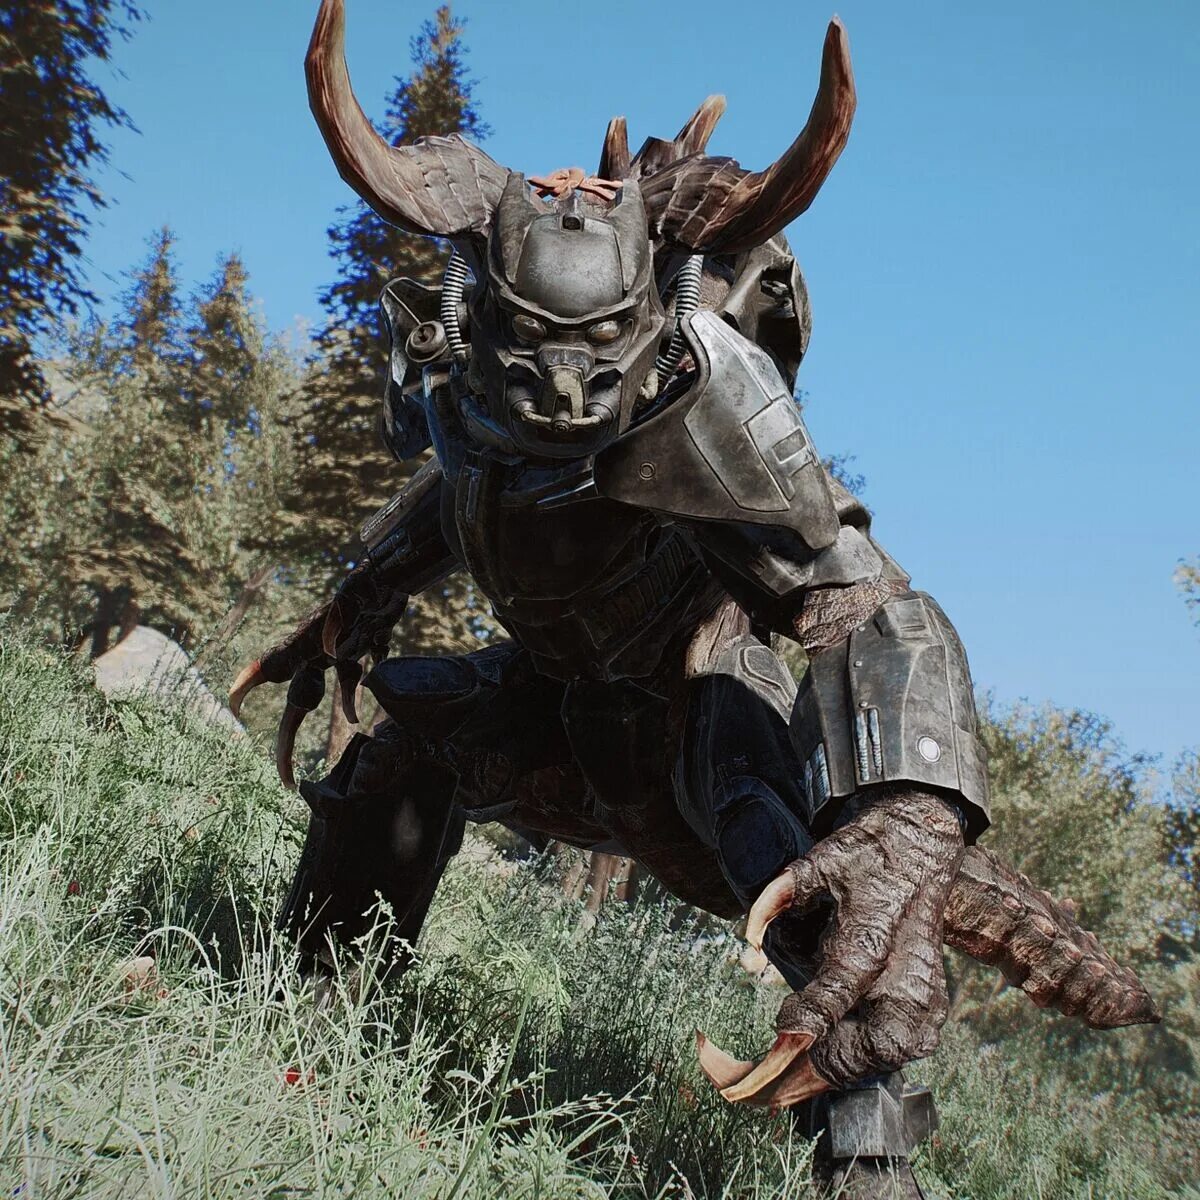 Fallout deathclaw. Fallout 4 Deathclaw Power Armor. Fallout Power Armor Deathclaw.